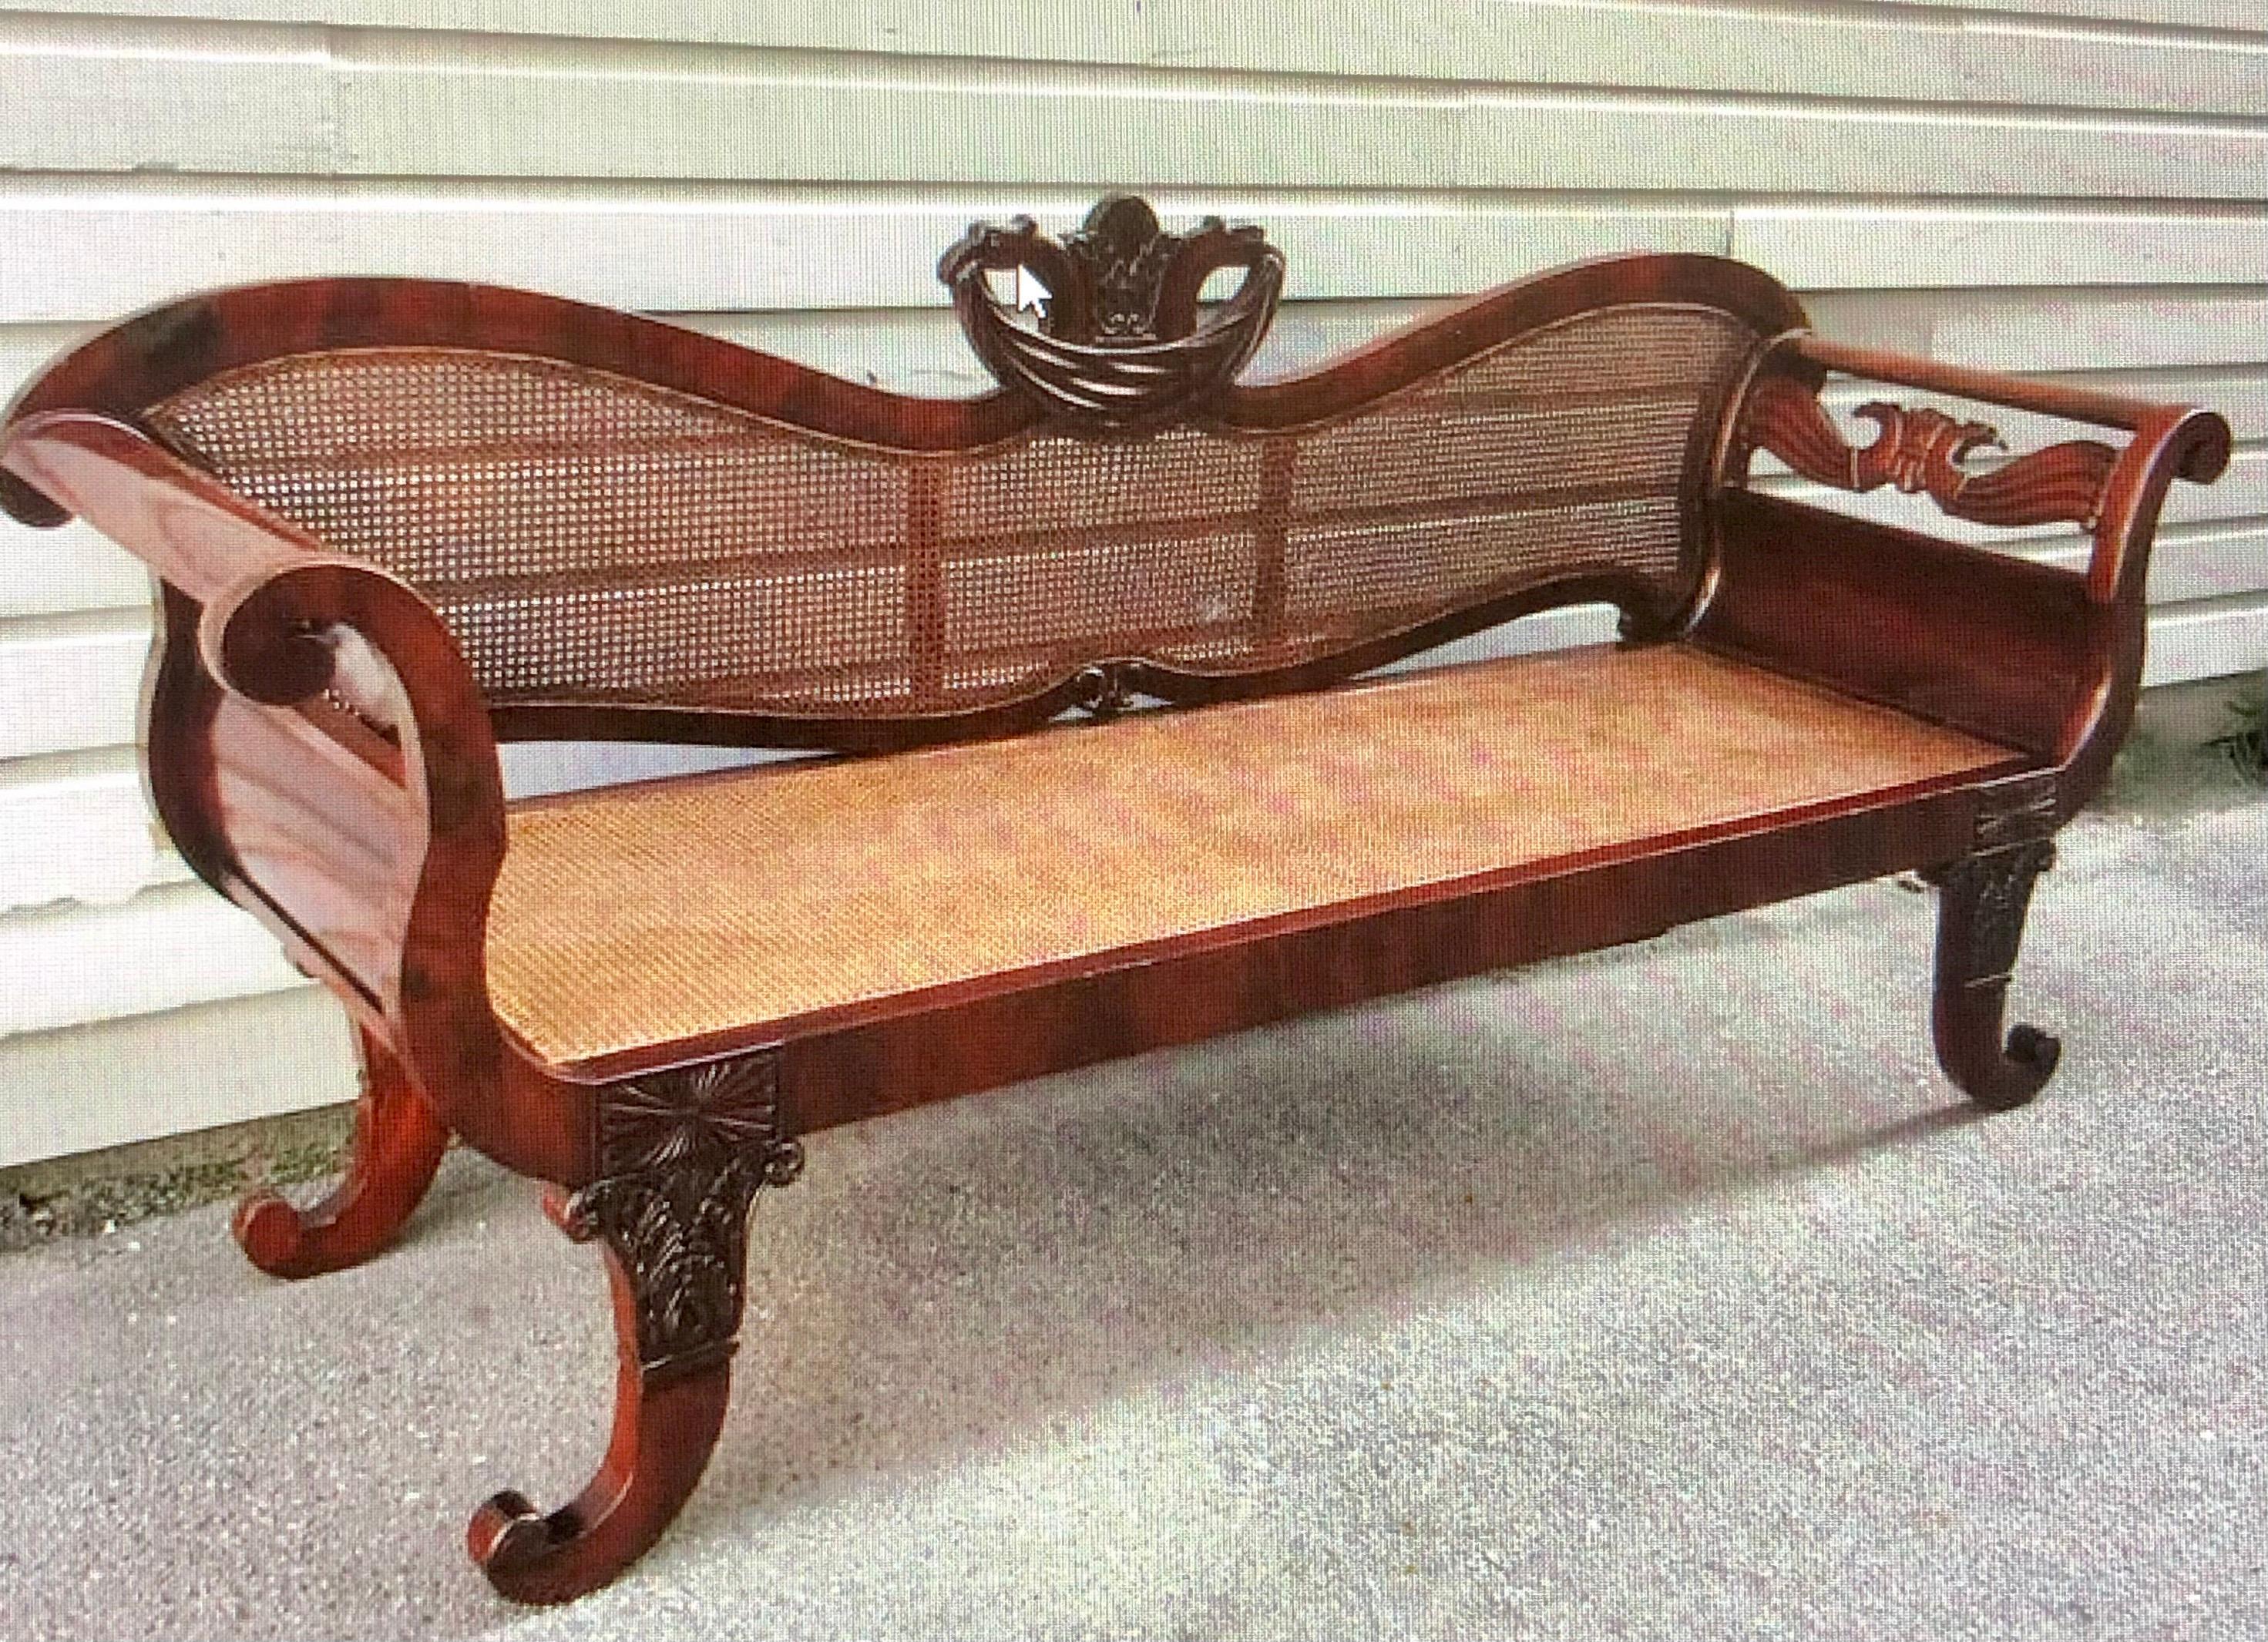 Notable Cuban Empire Mahogany caned sofa, circa 1820, featuring Flame Mahogany veneers and opposing Eagle carvings. The center crest of this Caribbean Settee has a Pineapple motif flanked by Regal Bird Heads clasping drapery from their beaks rest on